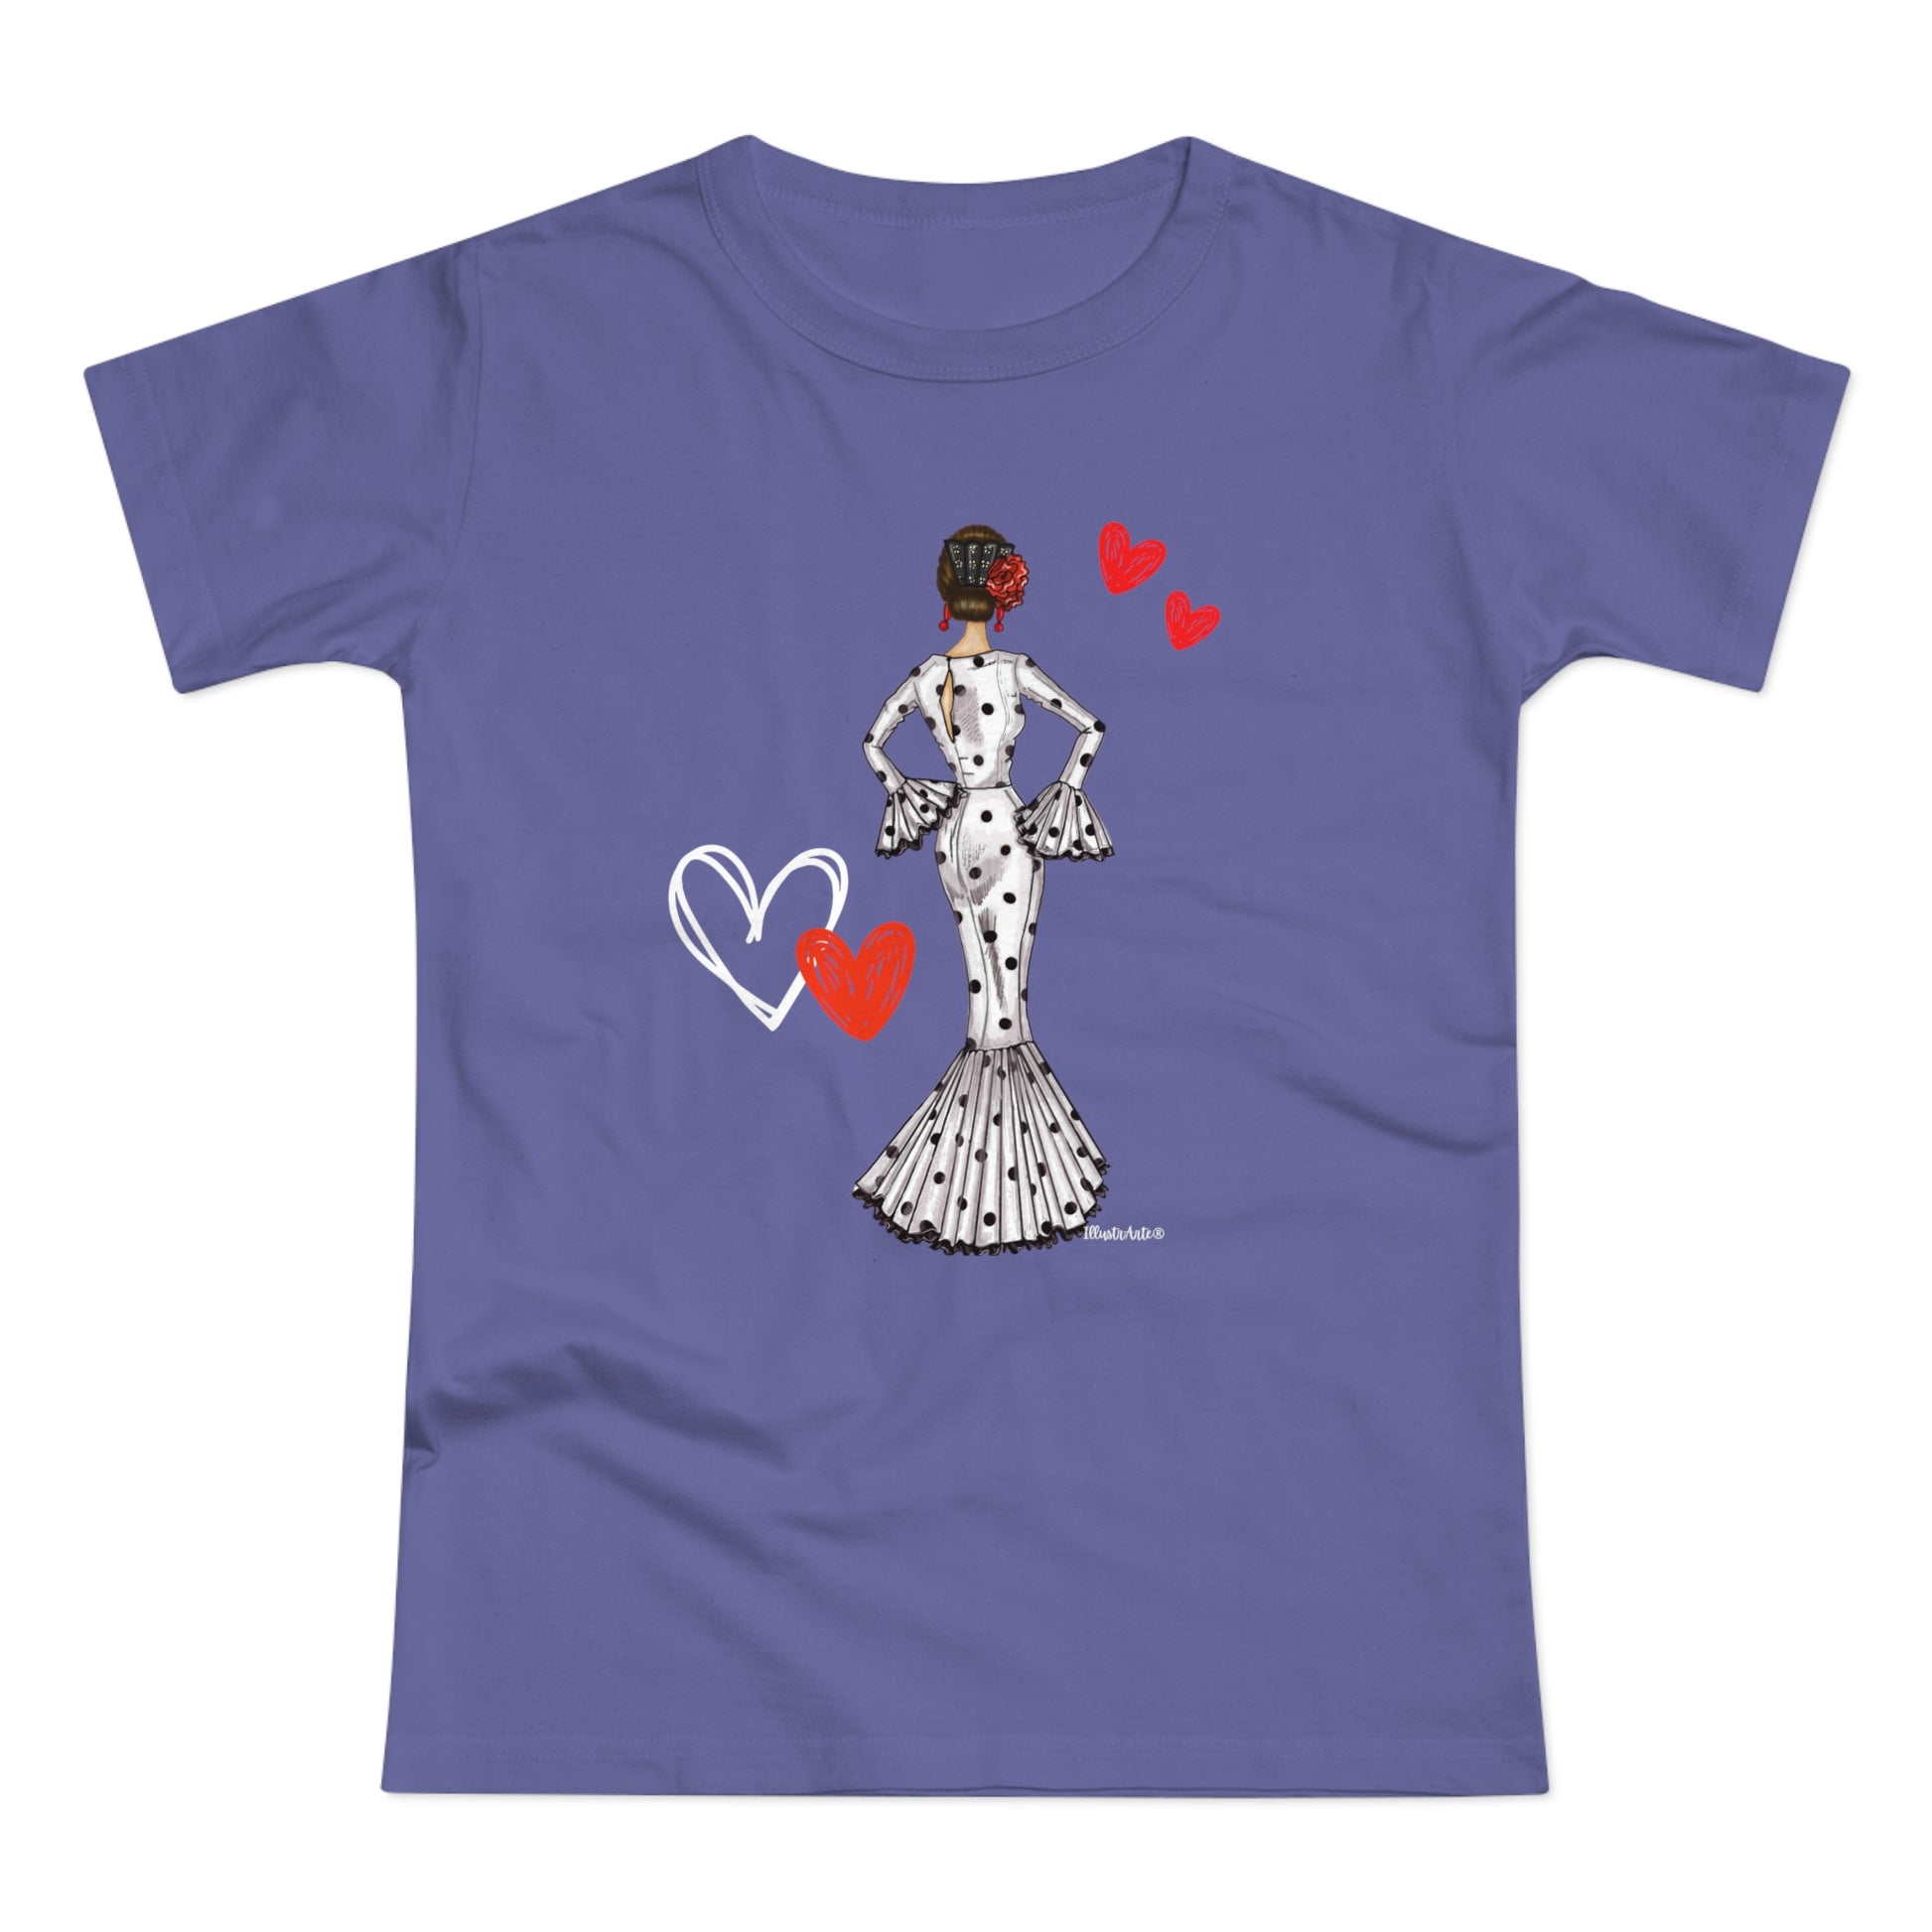 a women's t - shirt with a woman holding a heart